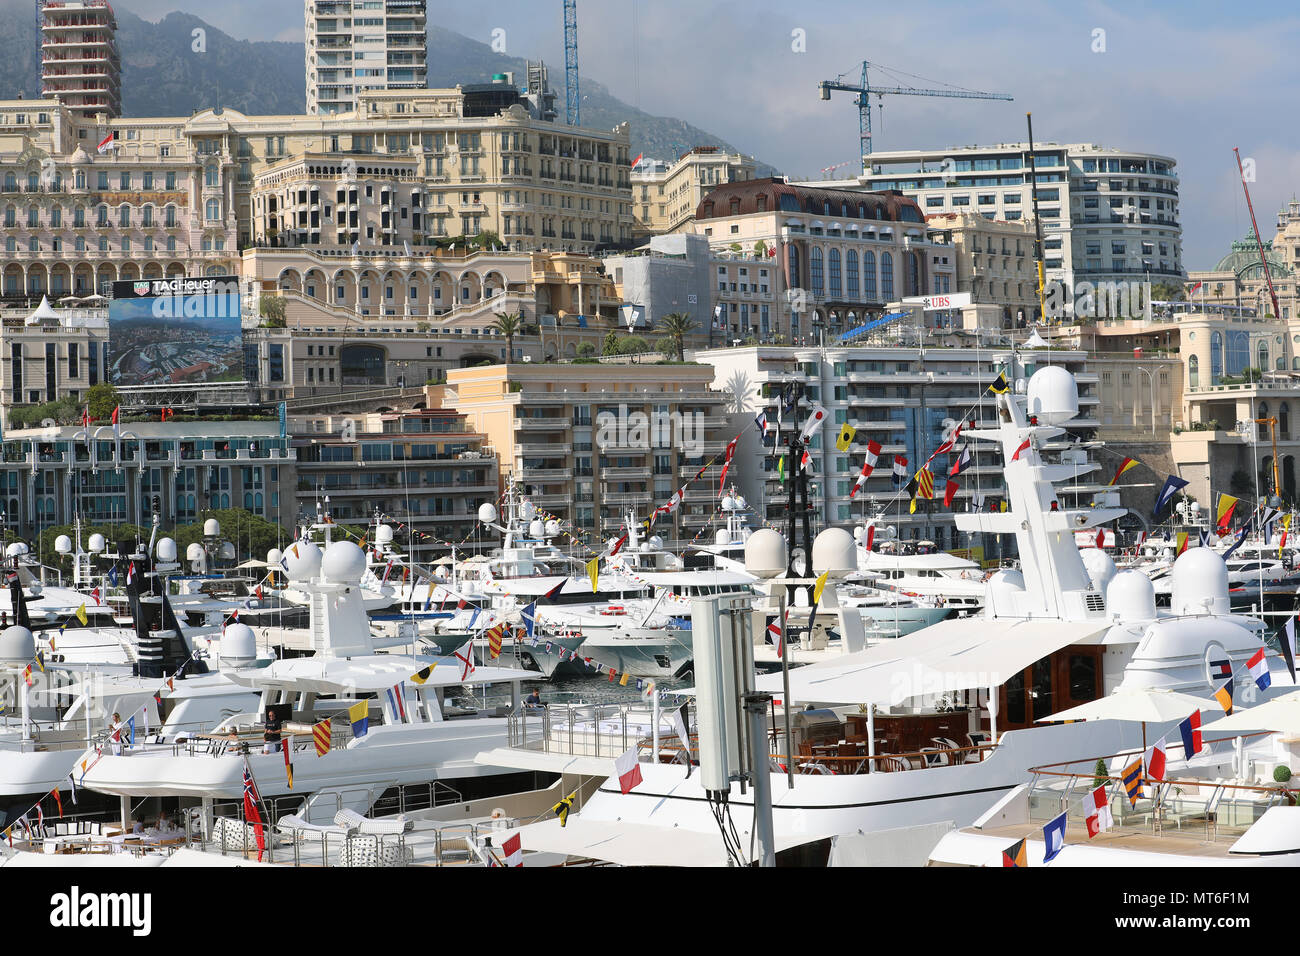 Monte-Carlo, Monaco - May 24, 2018: Many Luxurious Yachts Moored at Port Hercule, Architecture of Buildings And Skyscrapers in The Background.  Princi Stock Photo